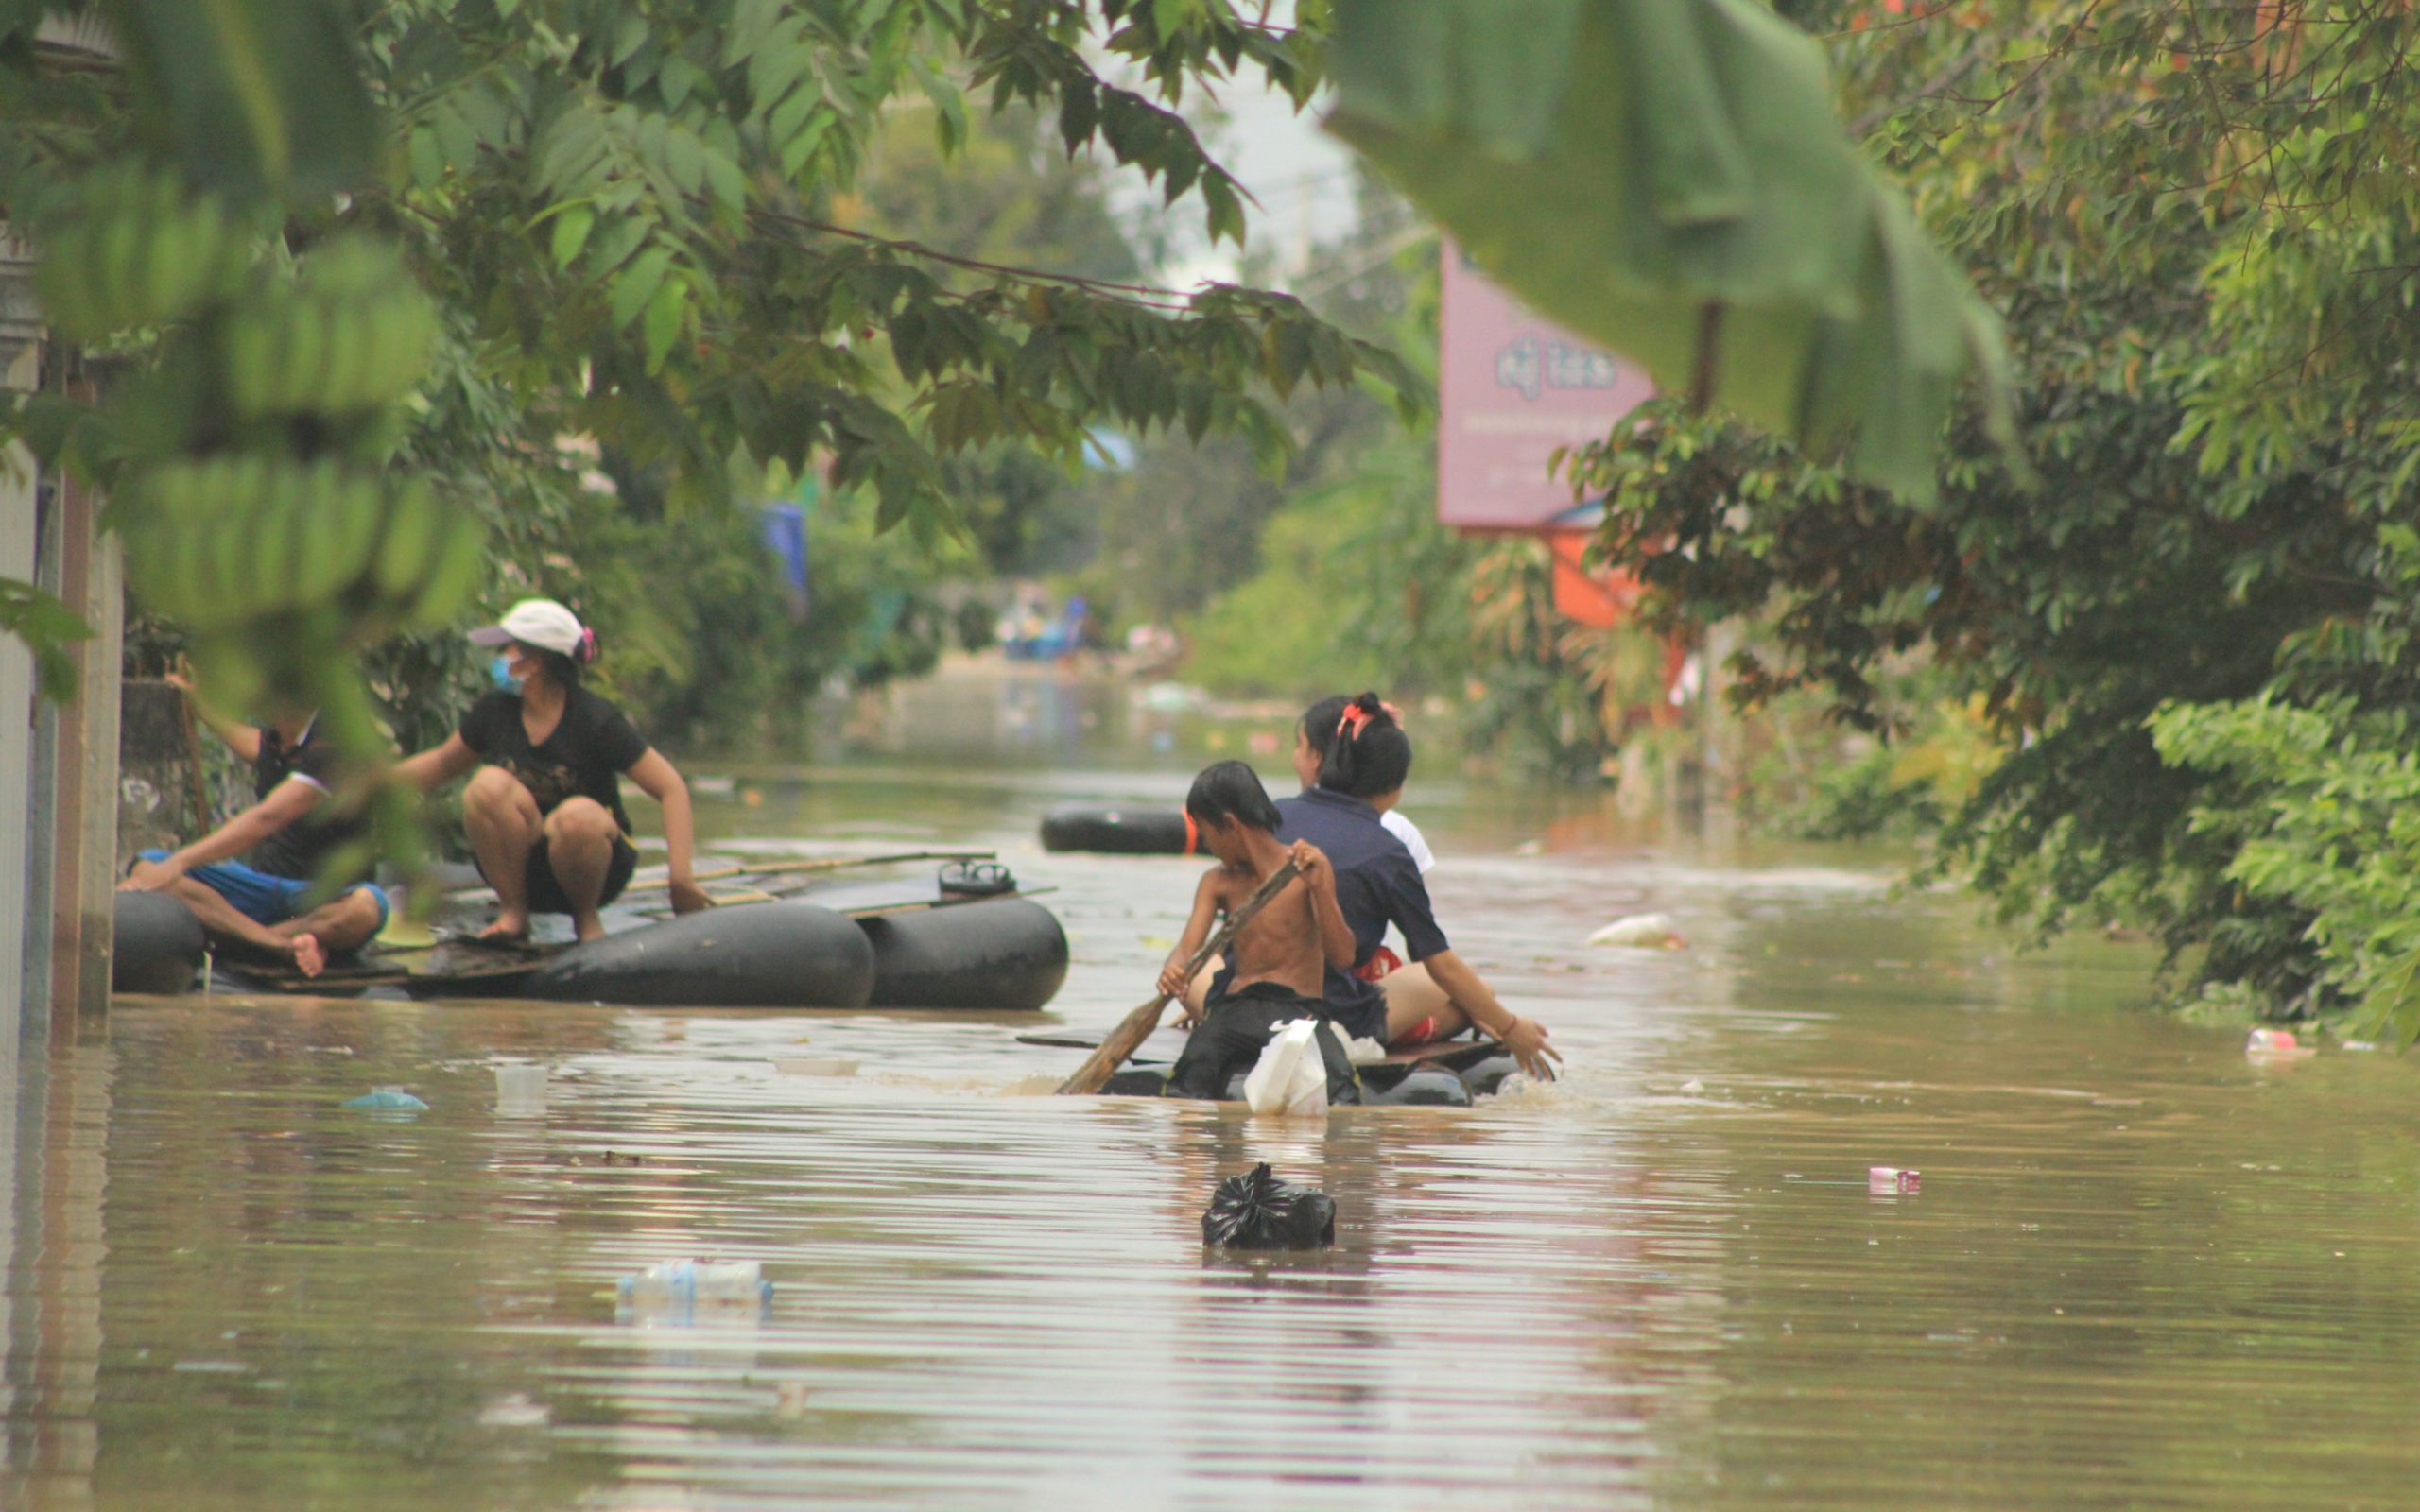 People paddle along flooded roads in Phnom Penh’s Dangkao district on October 28, 2021. (Andrew Haffner/VOD)